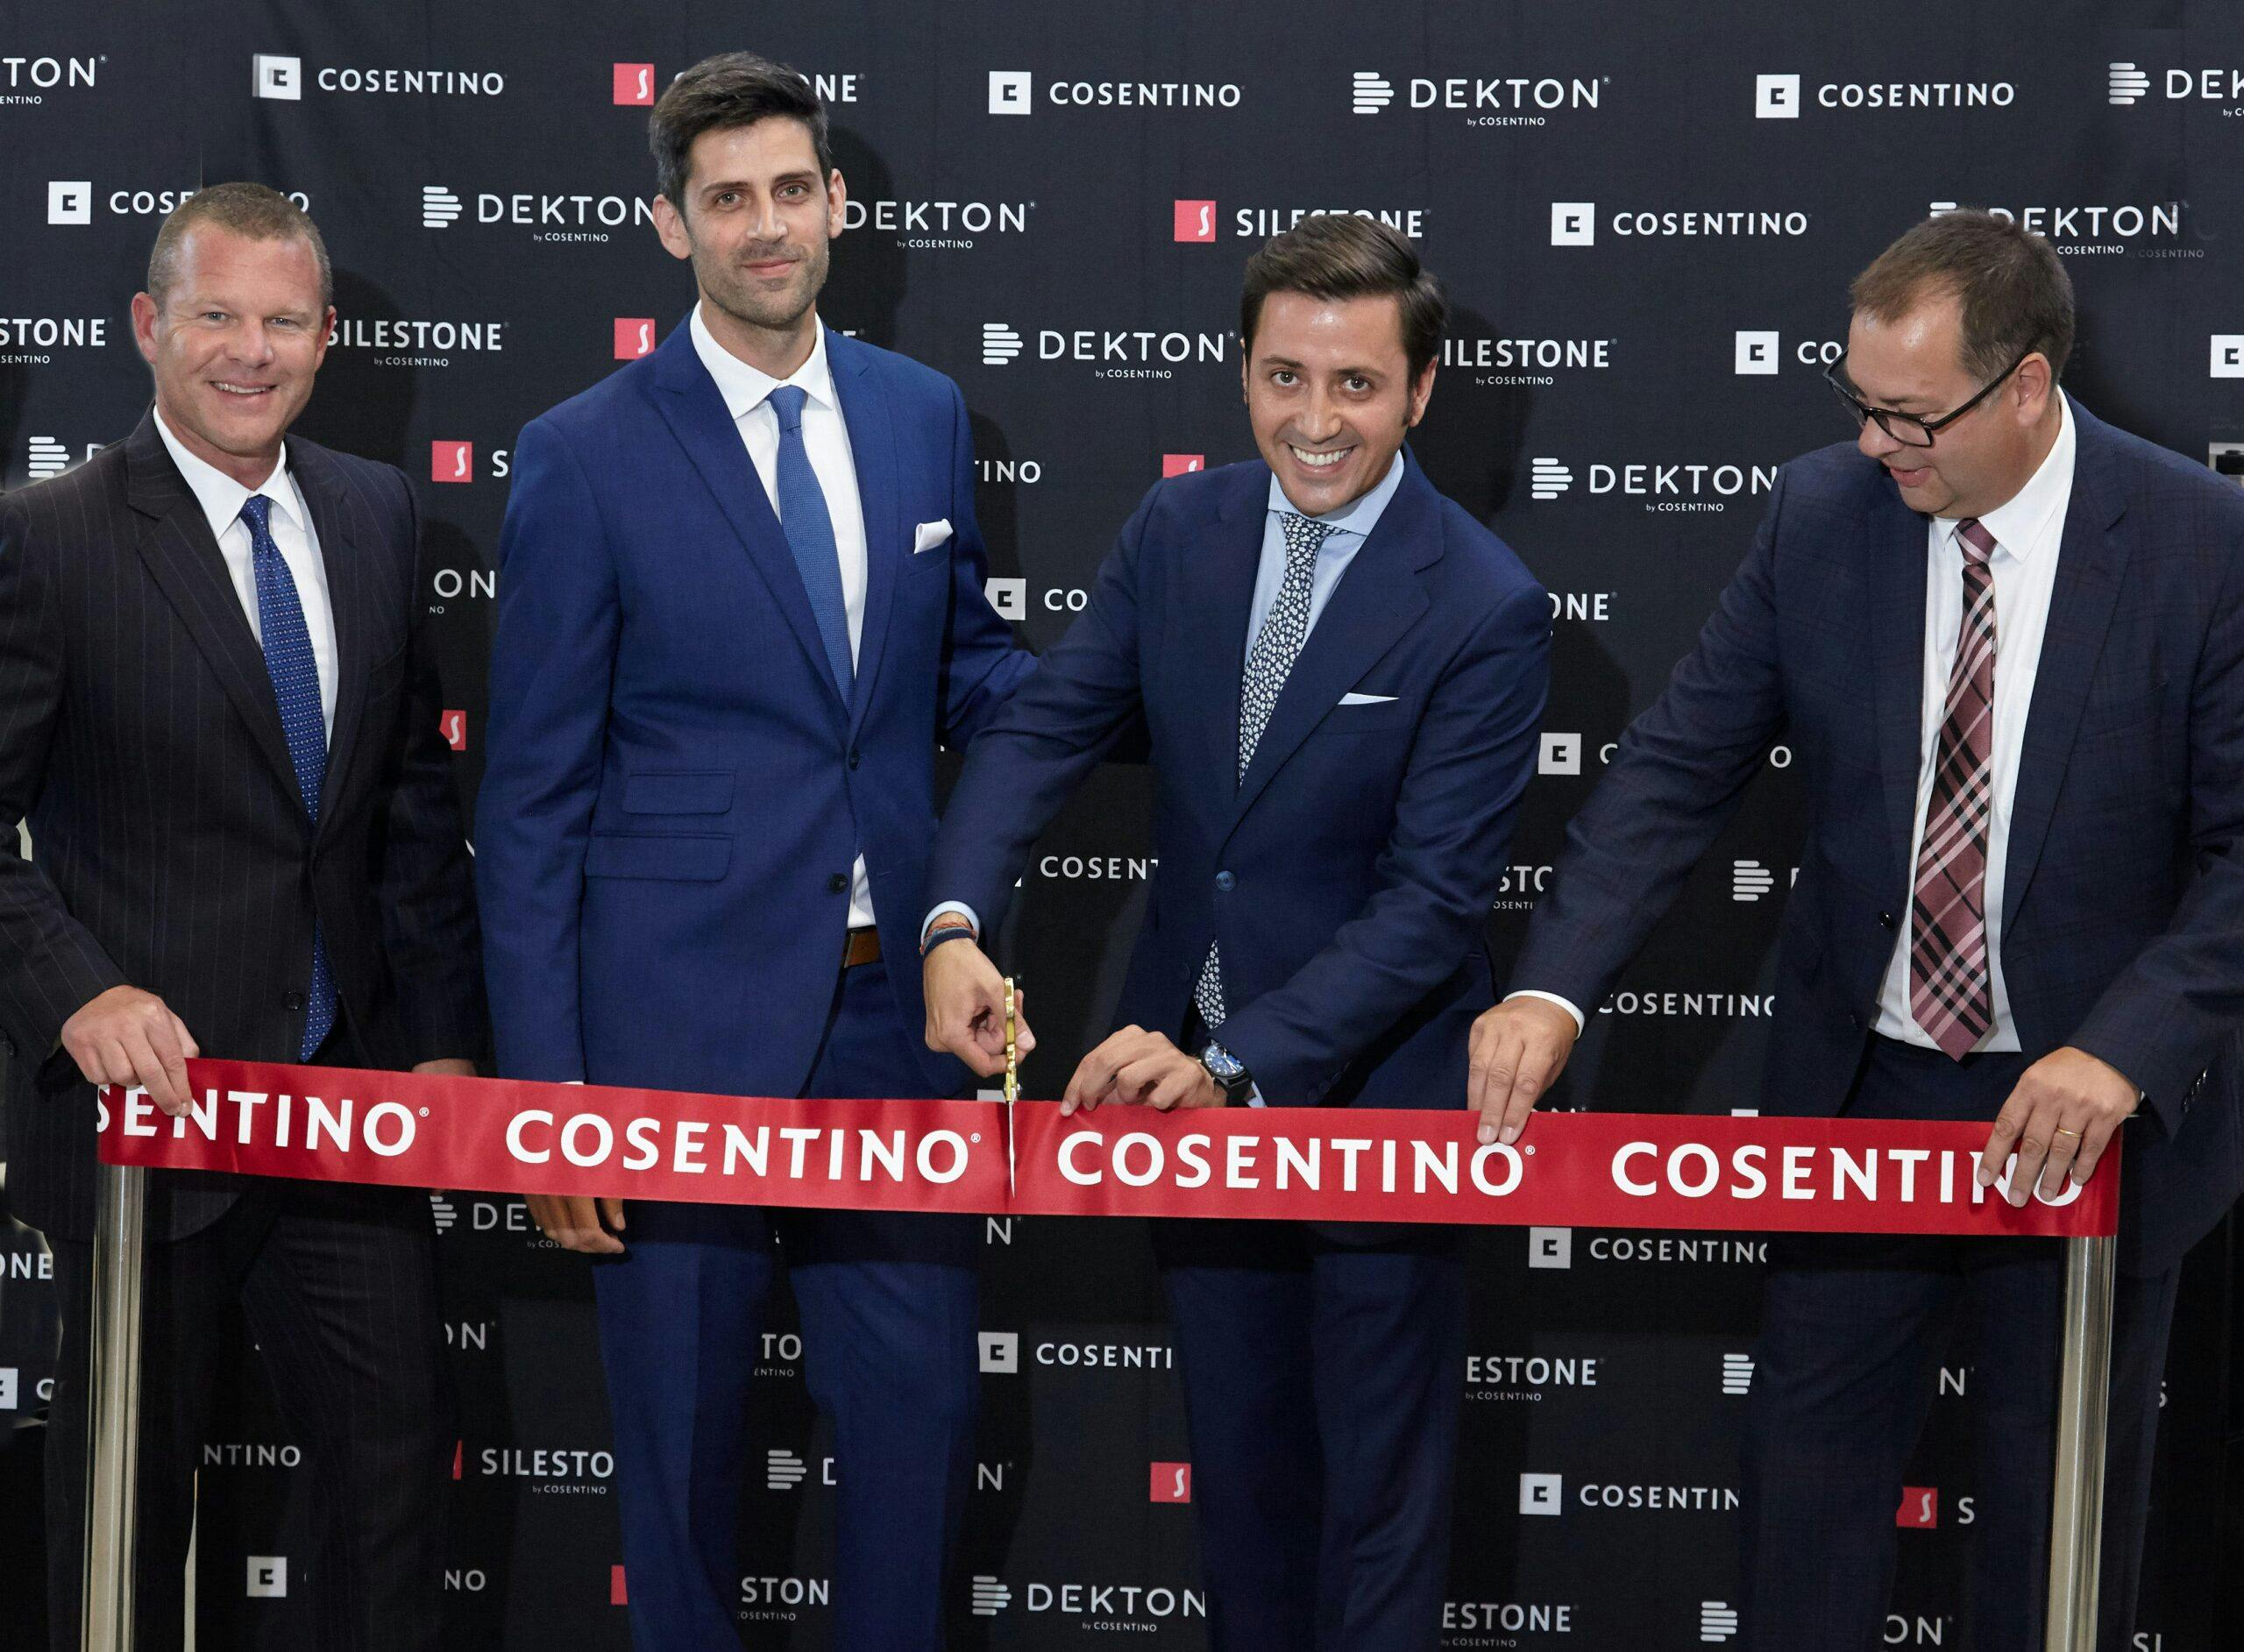 Image 34 of Cosentino Vancouver Center Opening 2018 2 1 scaled in Cosentino Officially Opens New Vancouver Centre Showroom - Cosentino